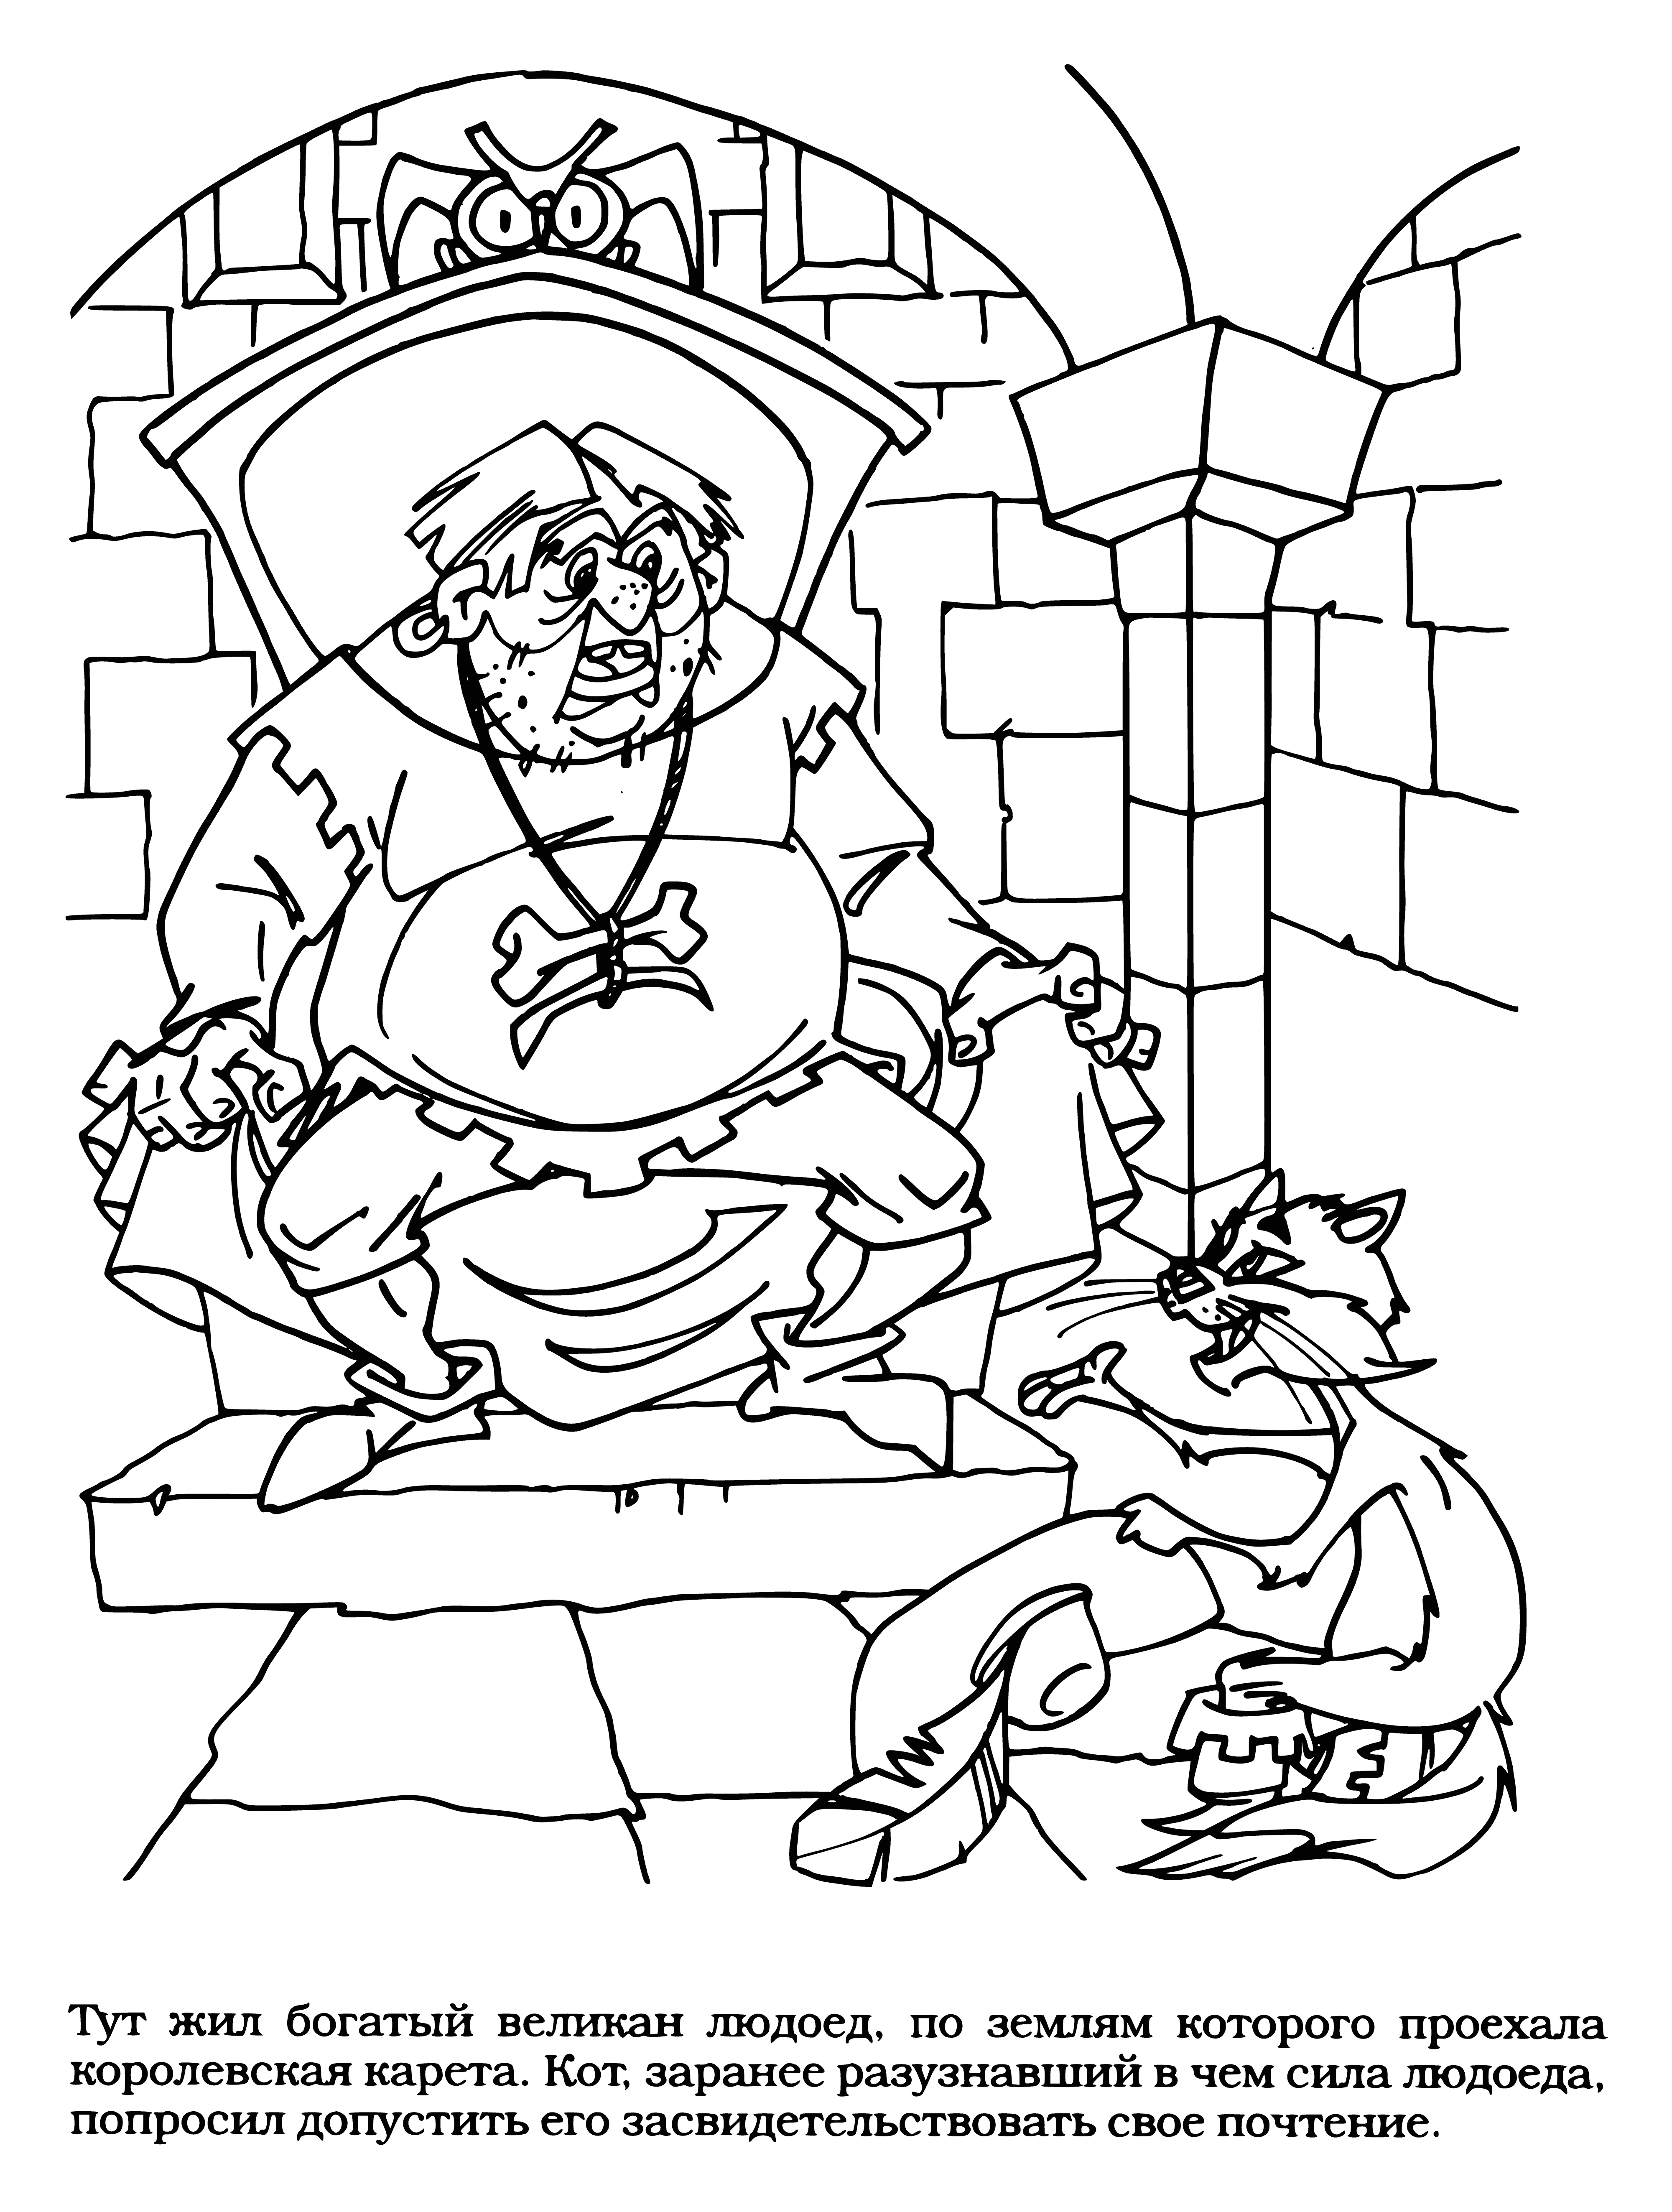 The cannibal adopted the cat coloring page